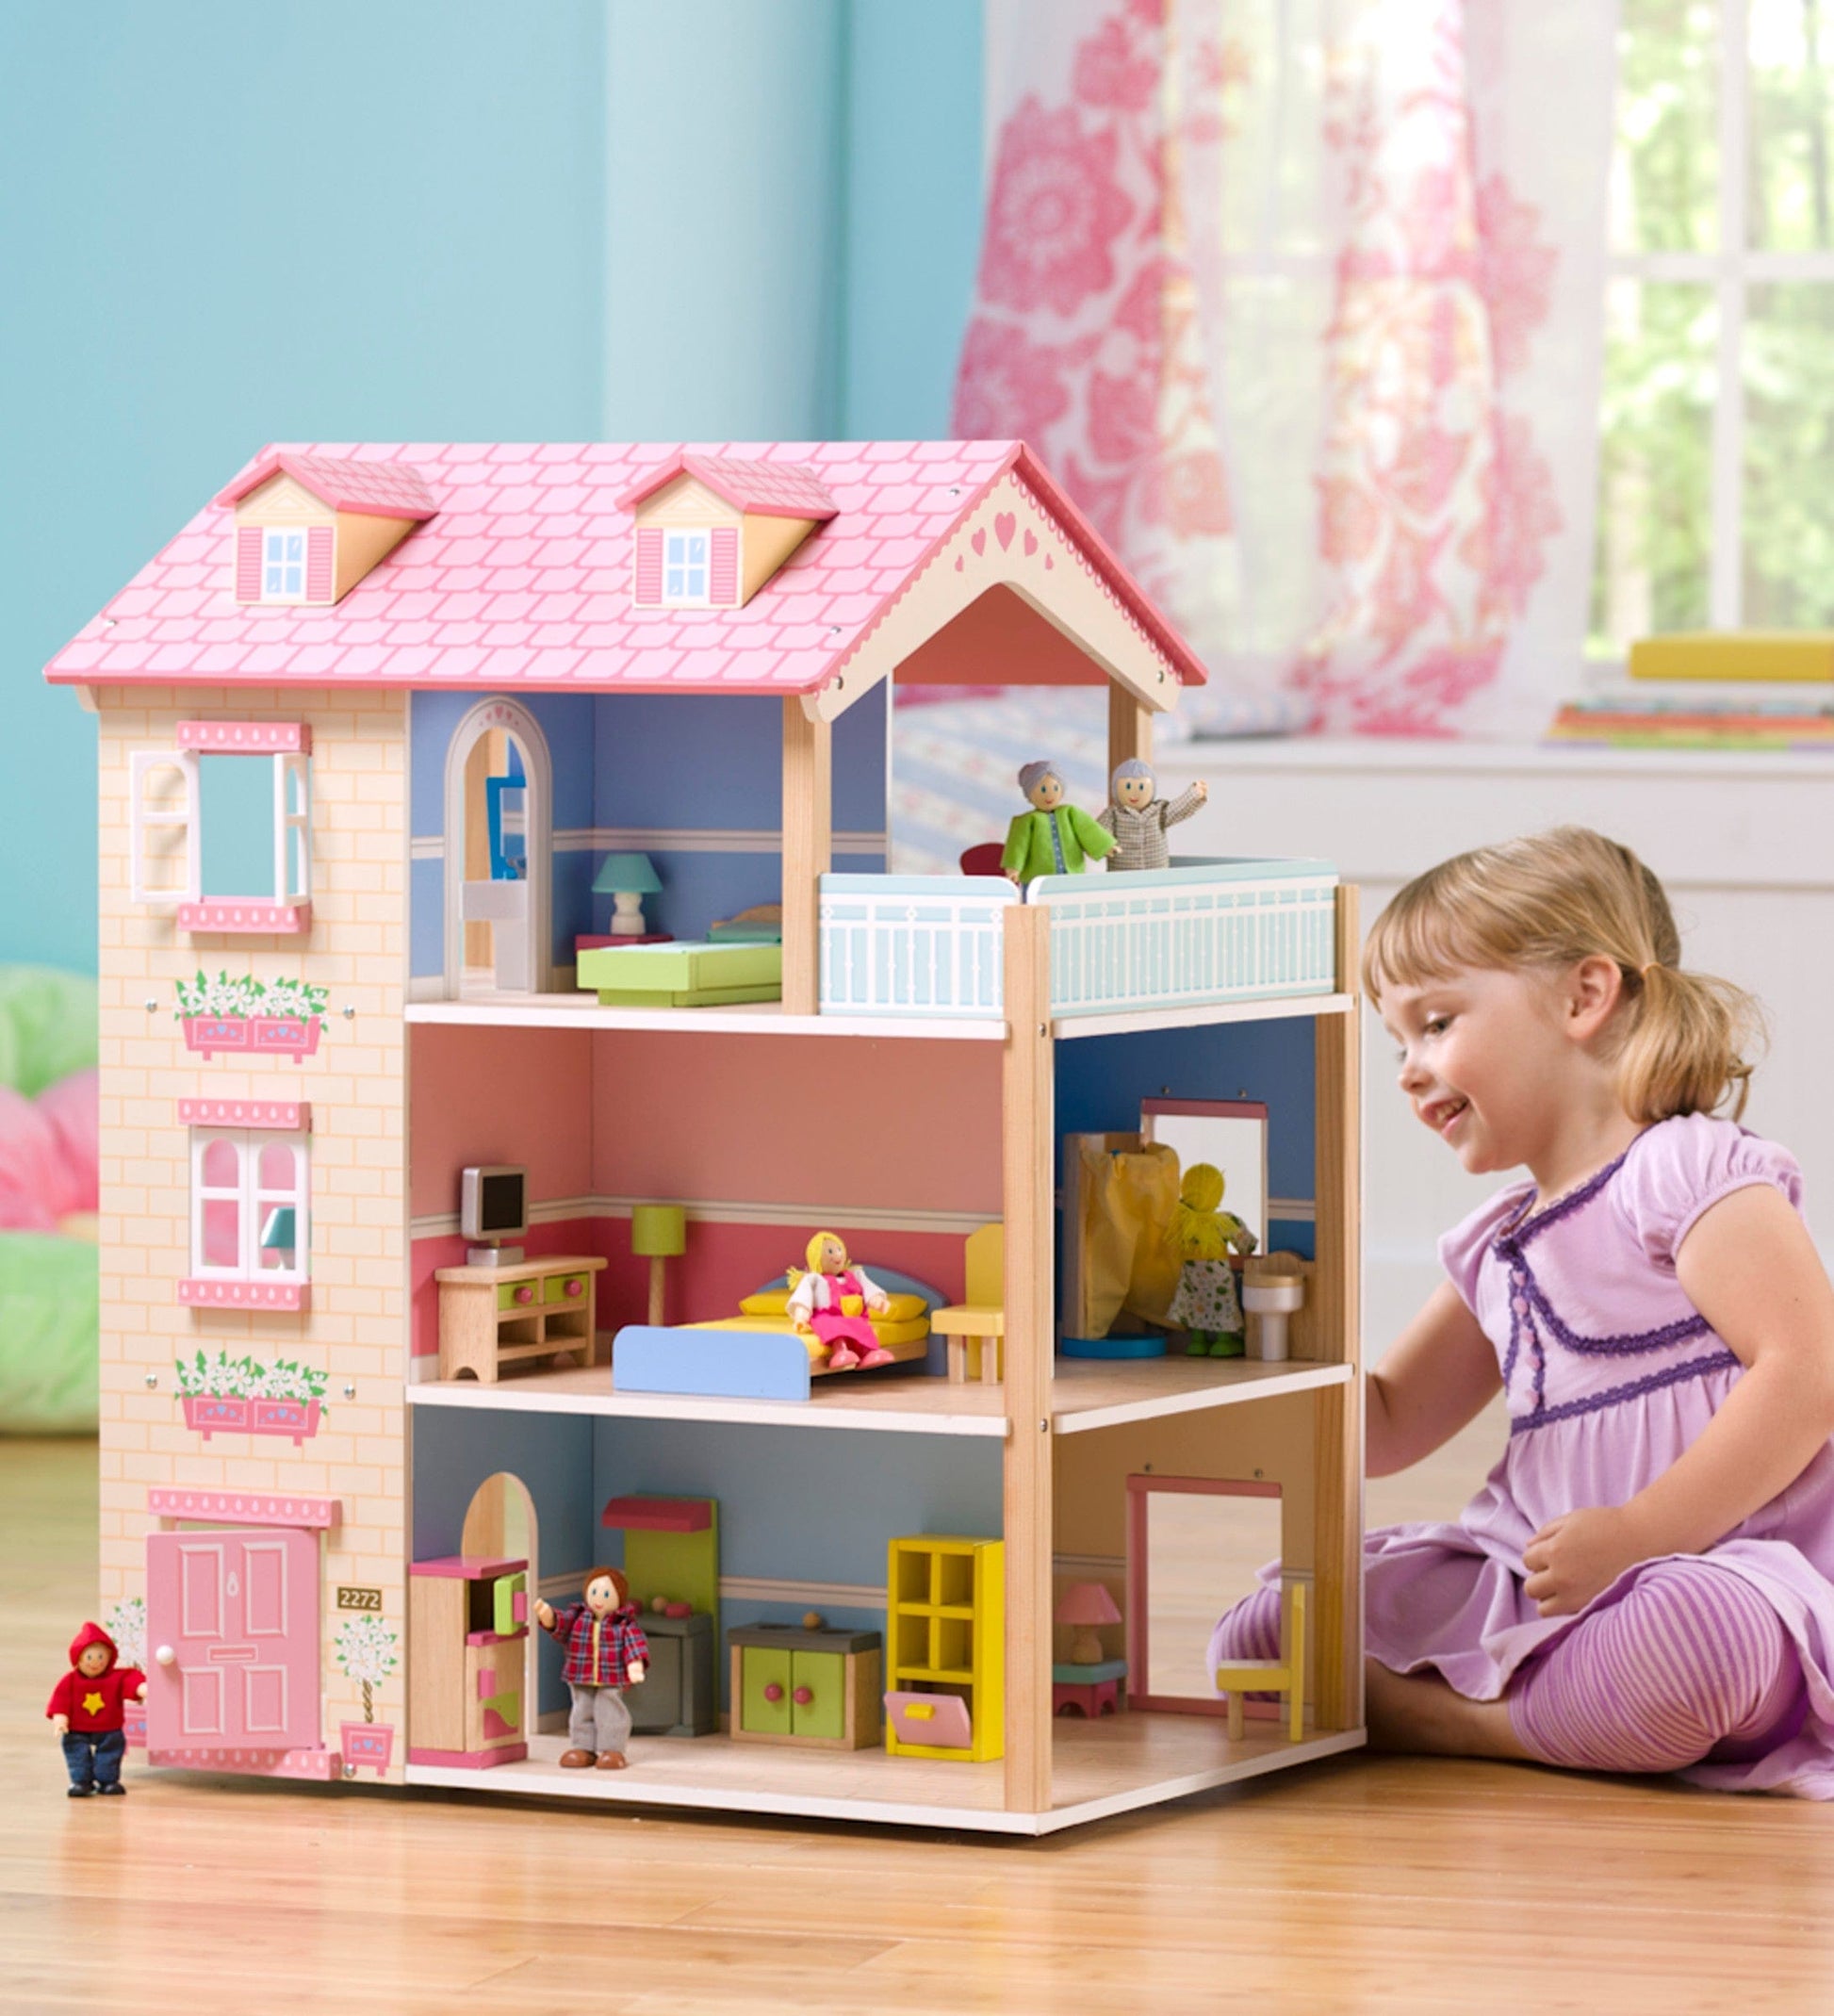 Large Dollhouses for Barbie Size Dolls